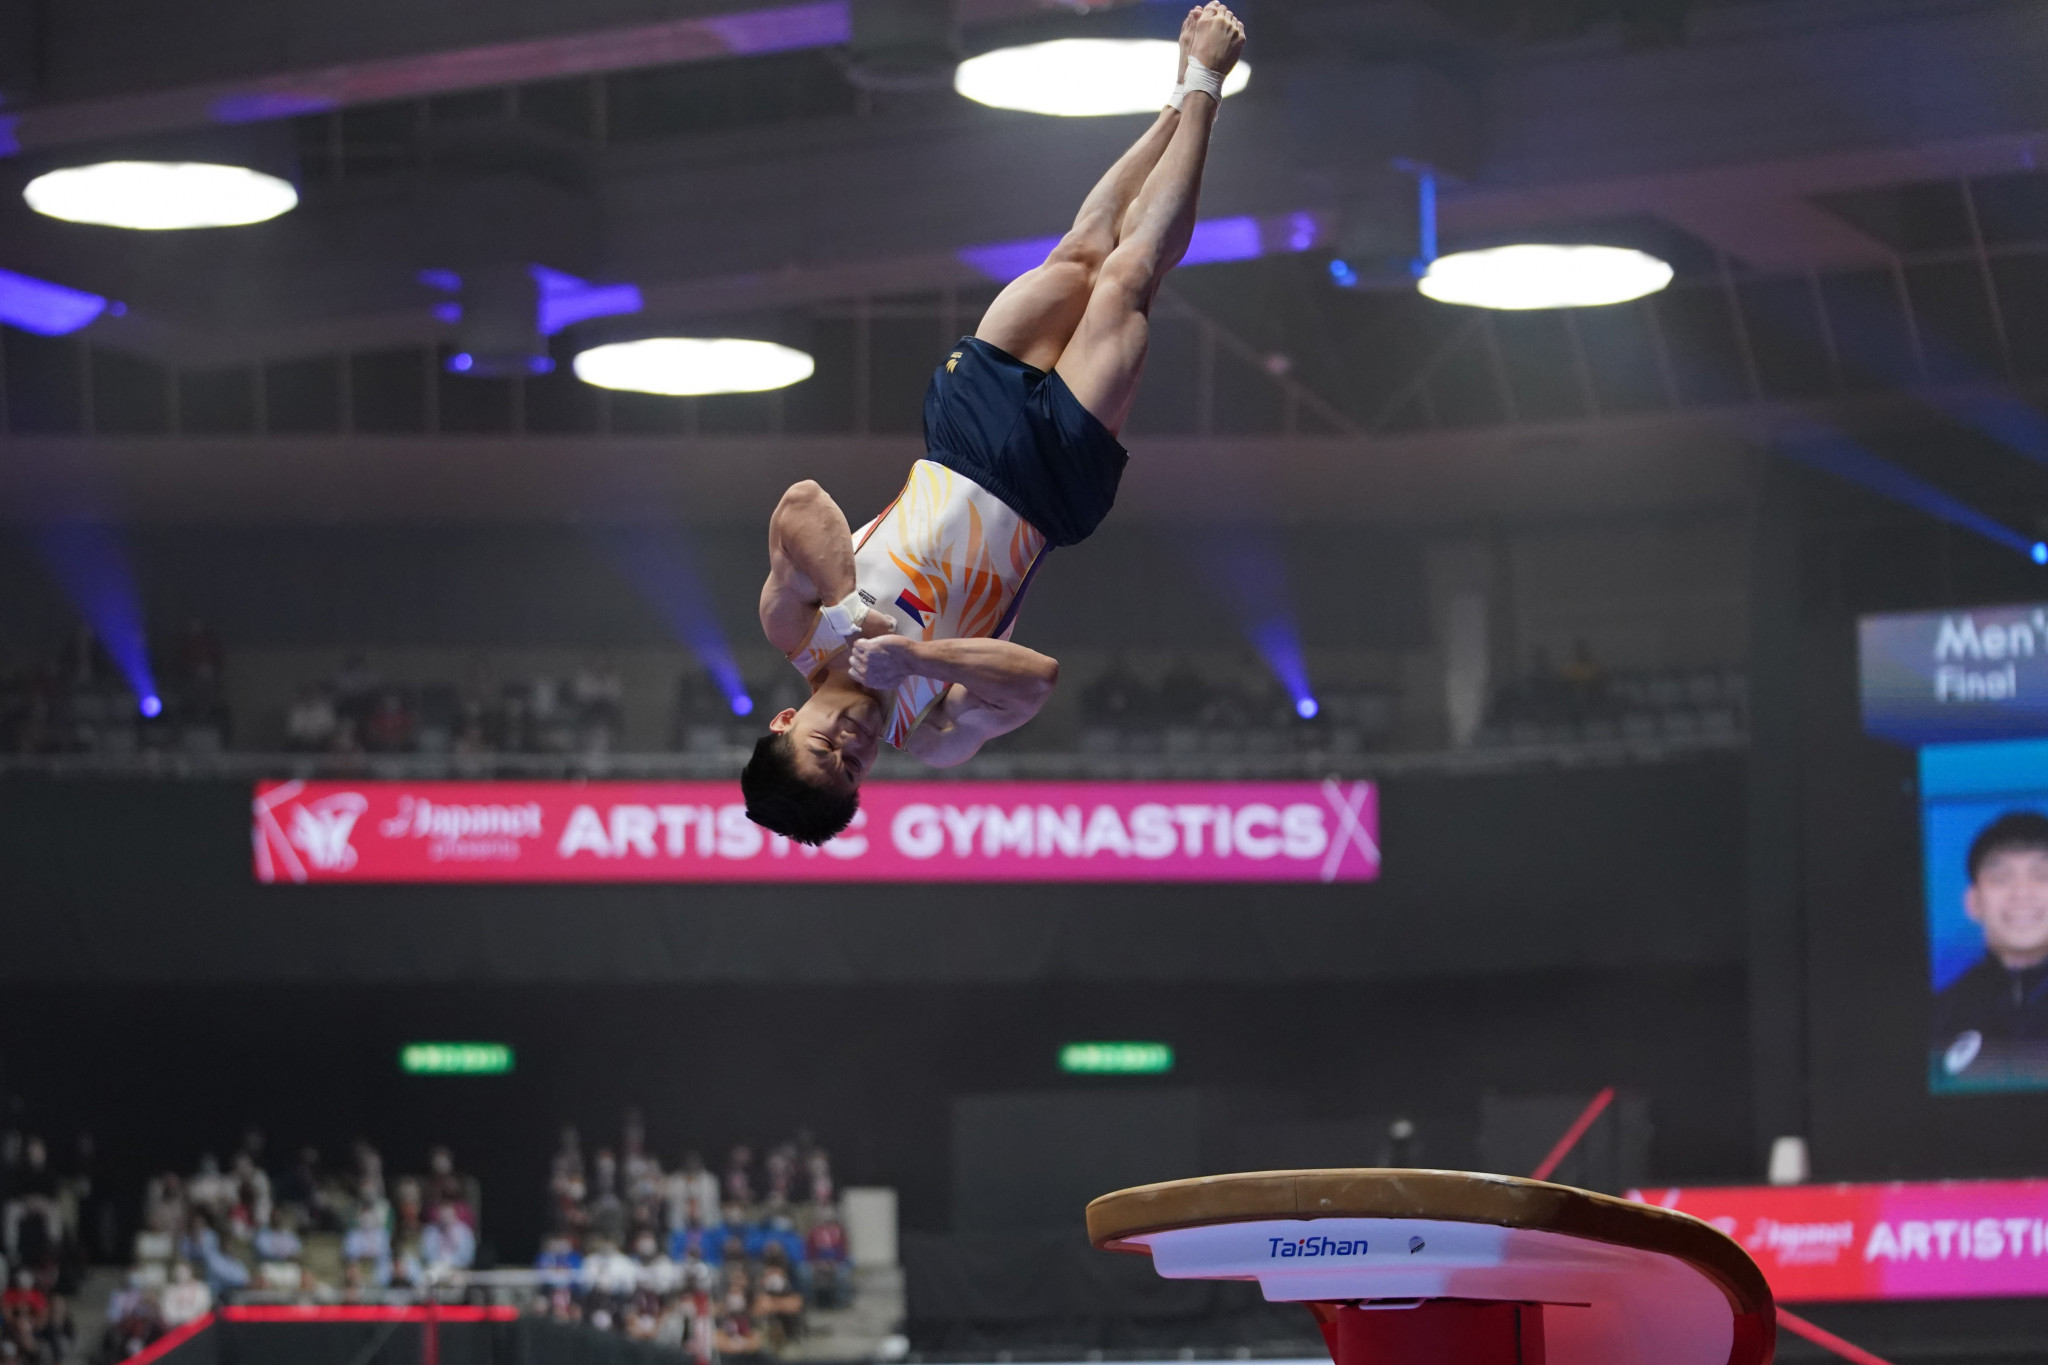 Yulo is the reigning world champion in vault, having claimed the title at the 2021 World Artistic Gymnastics Championships in Kitakyushu in Japan ©Getty Images